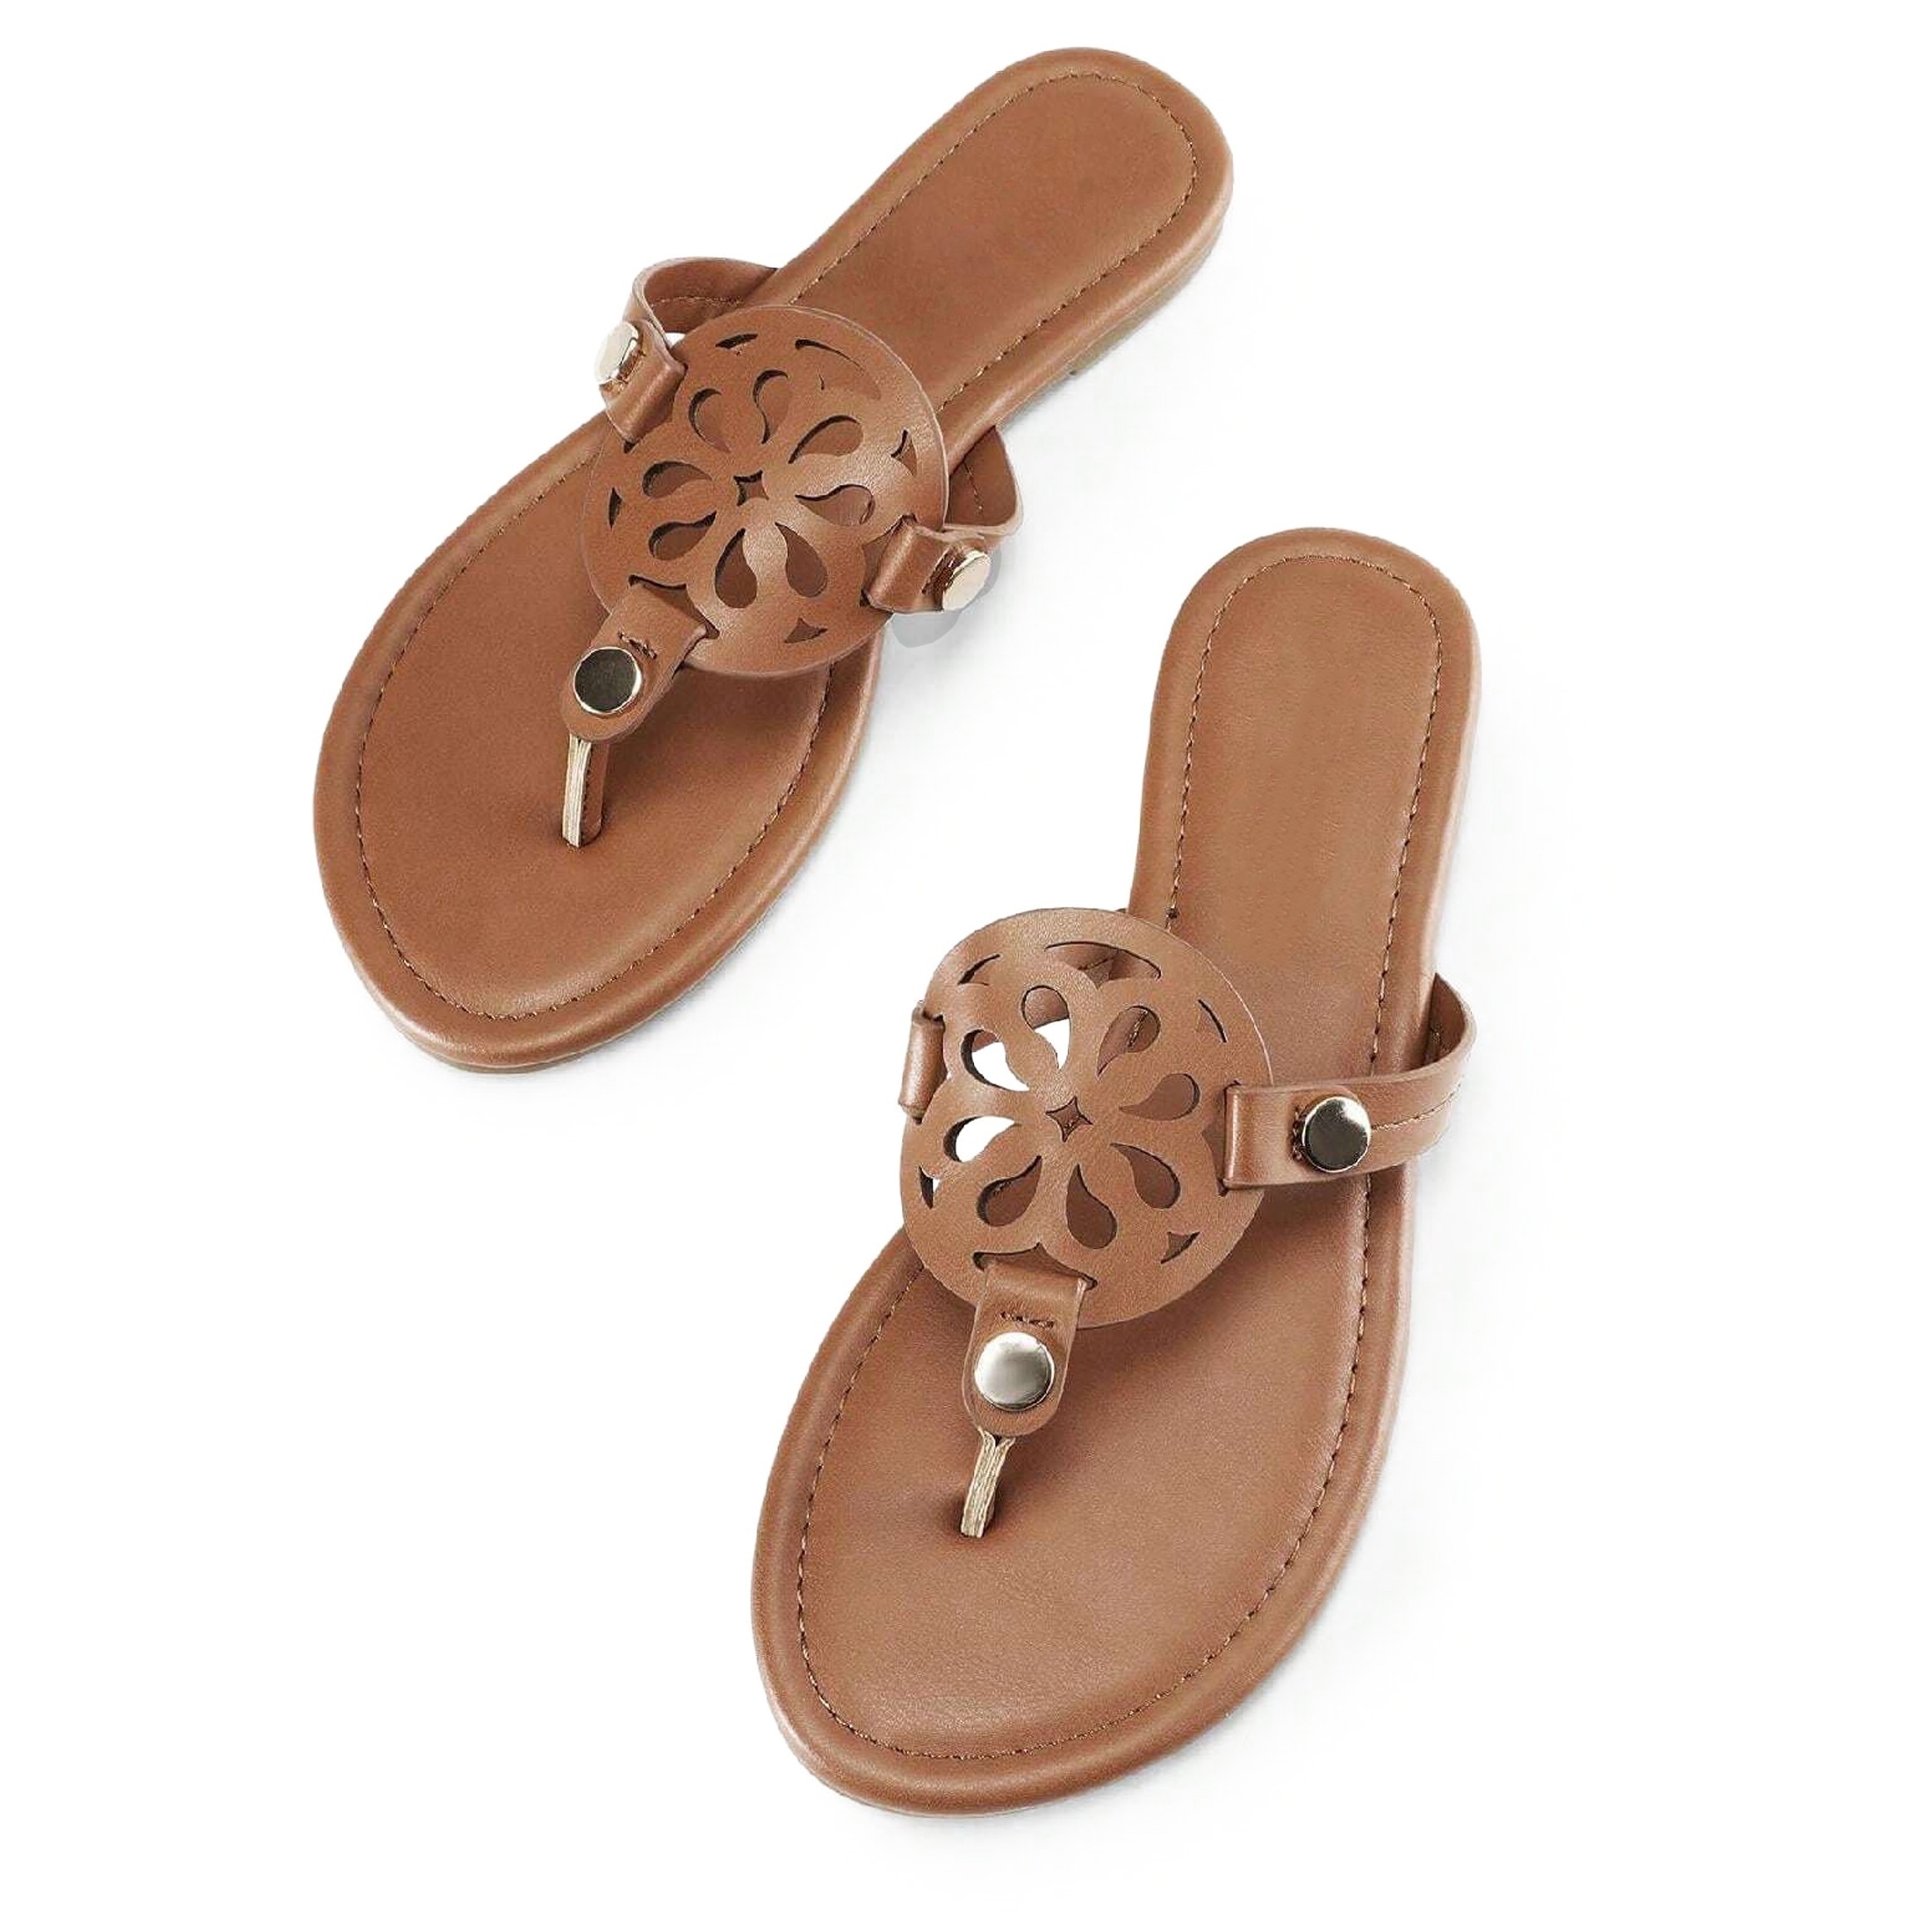 

Women's Casual Flat Sandals, Comfortable Dressy Thong Sandals With Floral Cut-out Design